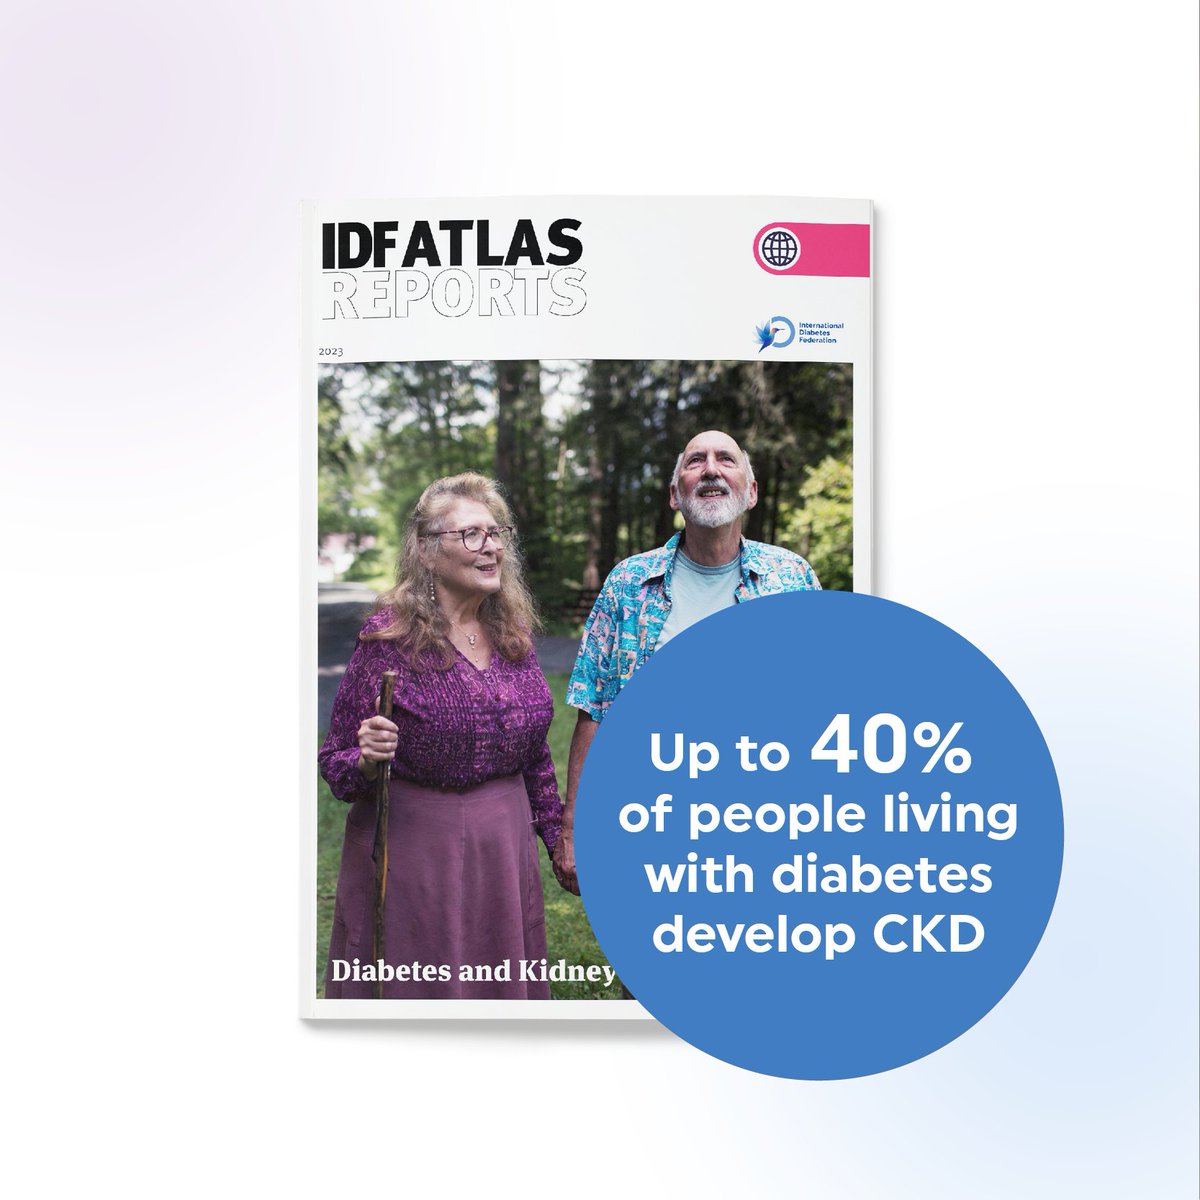 #DiabetesAtlas – Did you know that chronic kidney disease (CKD) affects up to 40% of people living with diabetes? Learn more about the prevalence of diabetes-related CKD and ways to reduce its impact through our Diabetes Atlas report: bit.ly/atlas-ckd-2023